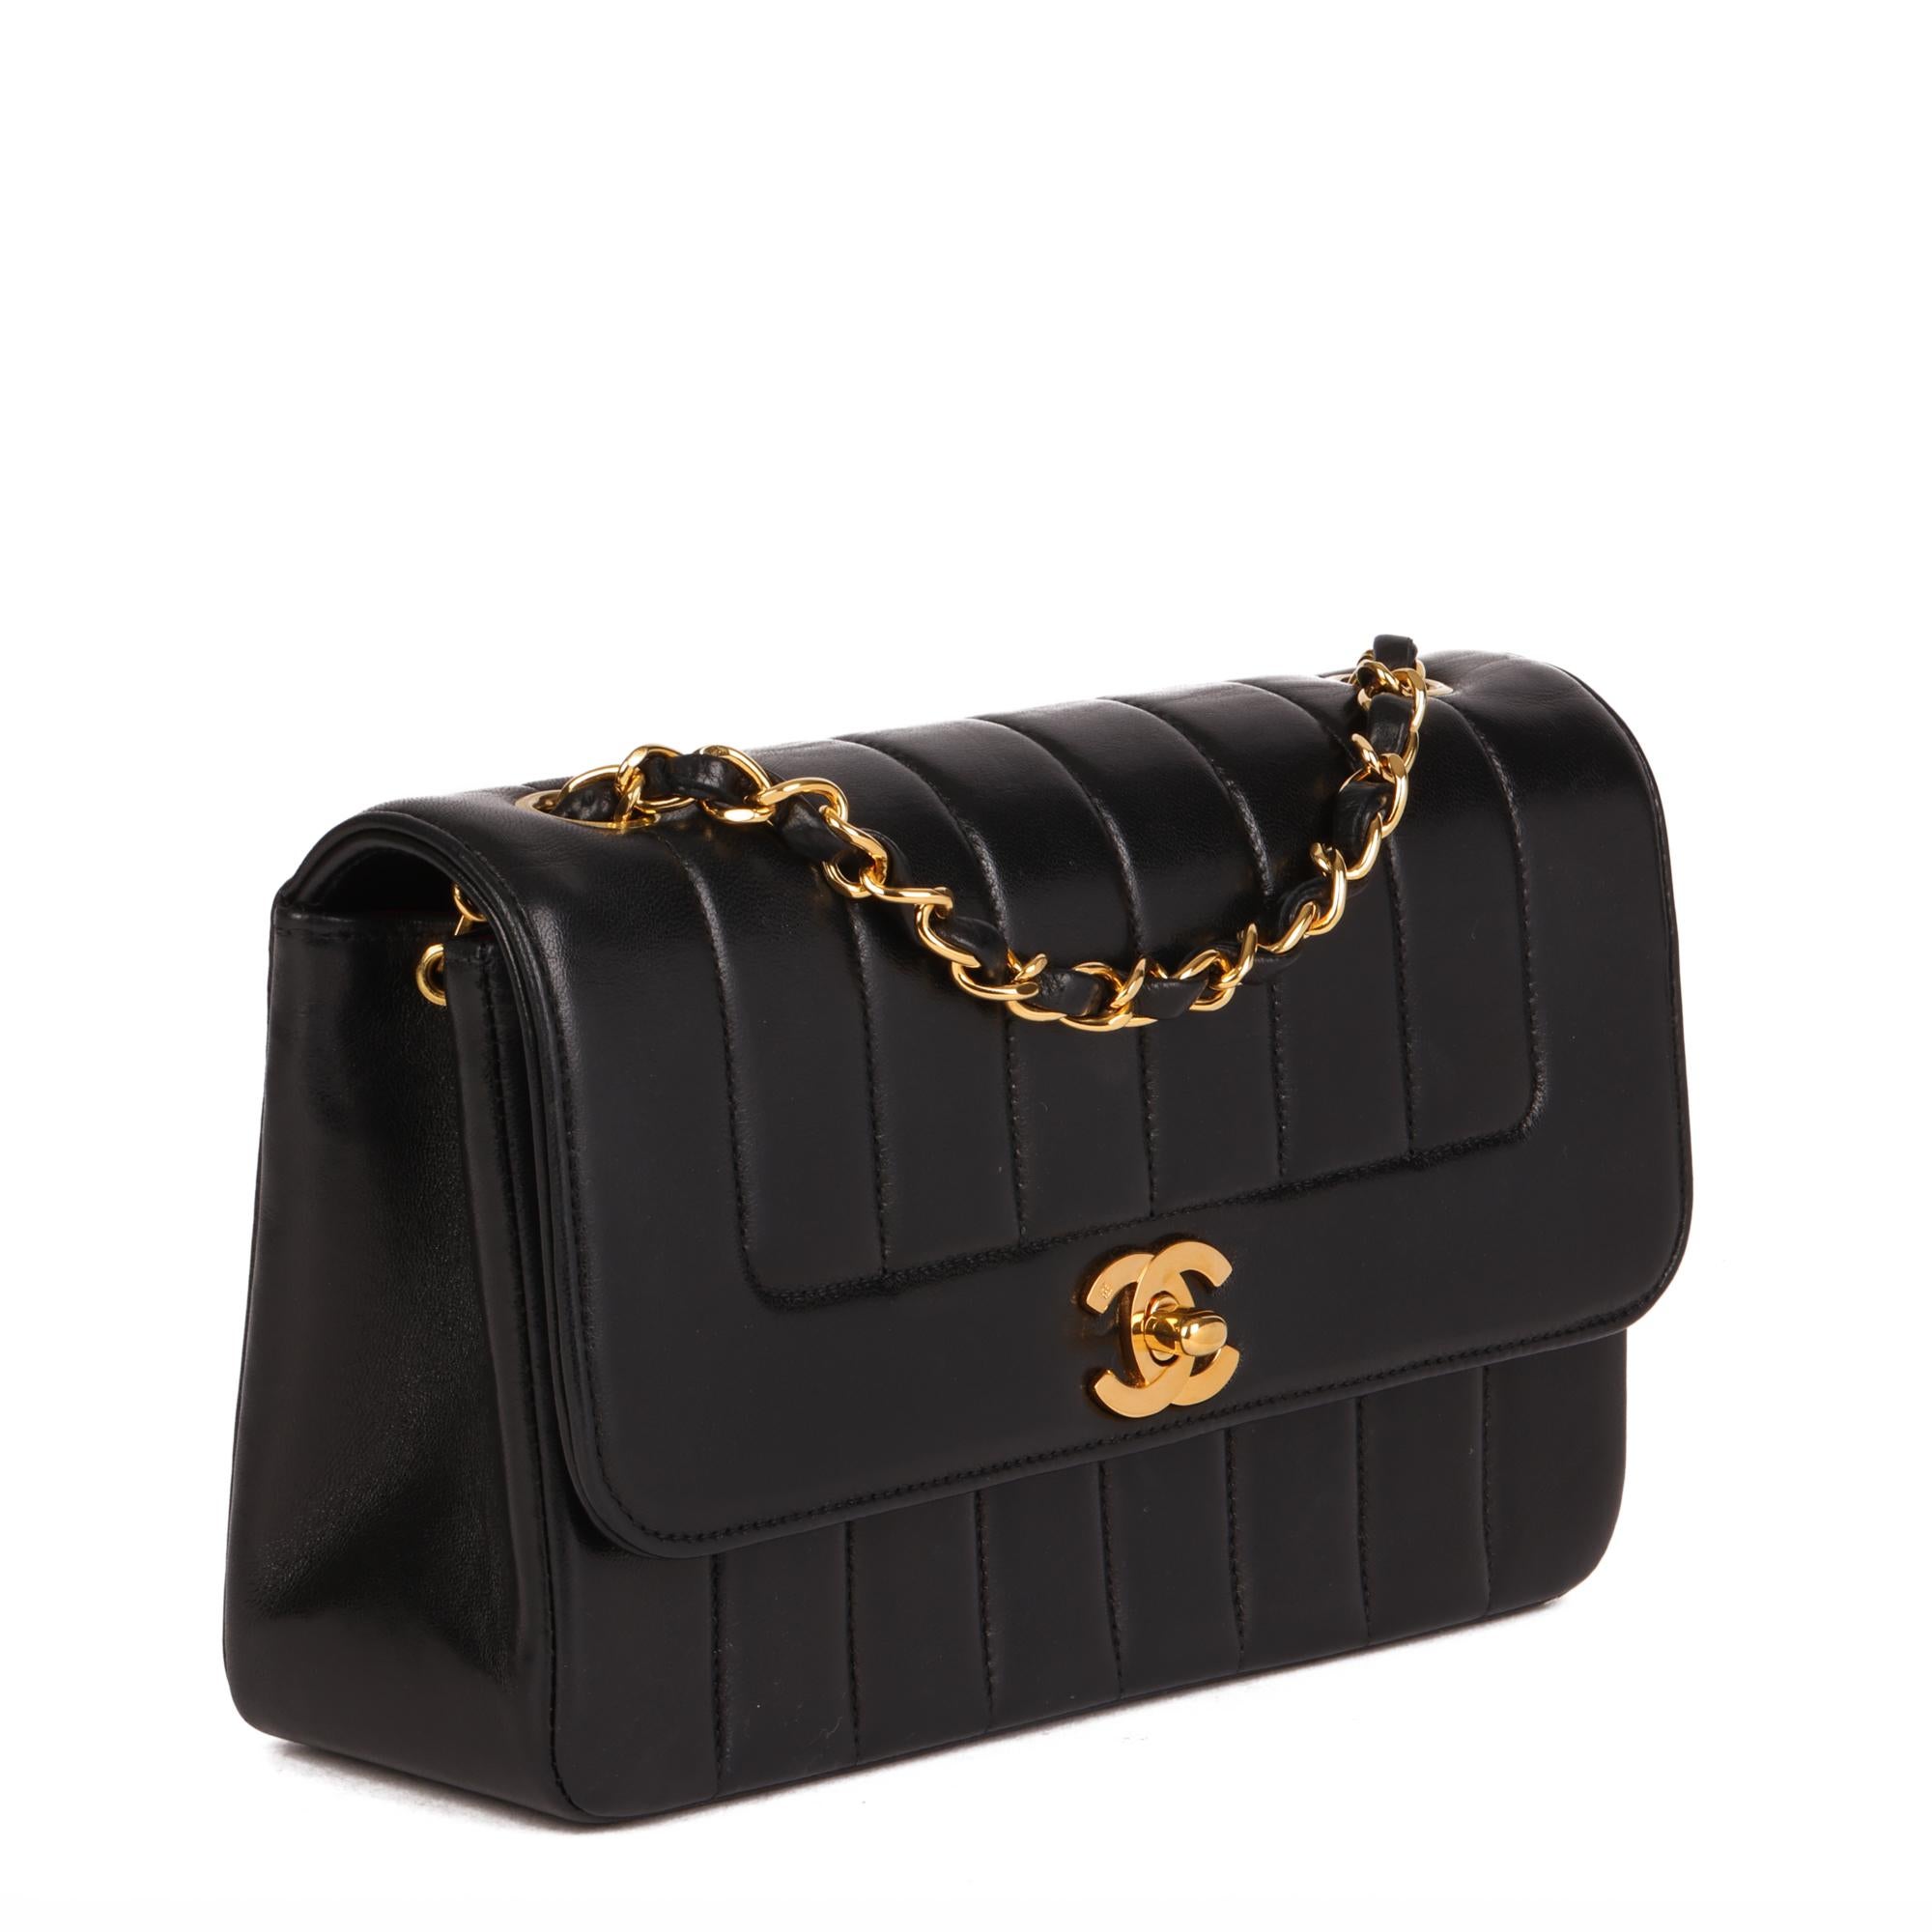 CHANEL
Black Vertical Quilted Lambskin Vintage Small Classic Single Flap Bag

Xupes Reference: HB4258
Serial Number: 2279134
Age (Circa): 1993
Accompanied By: Chanel Dust Bag, Authenticity Card 
Authenticity Details: Authenticity Card, Serial